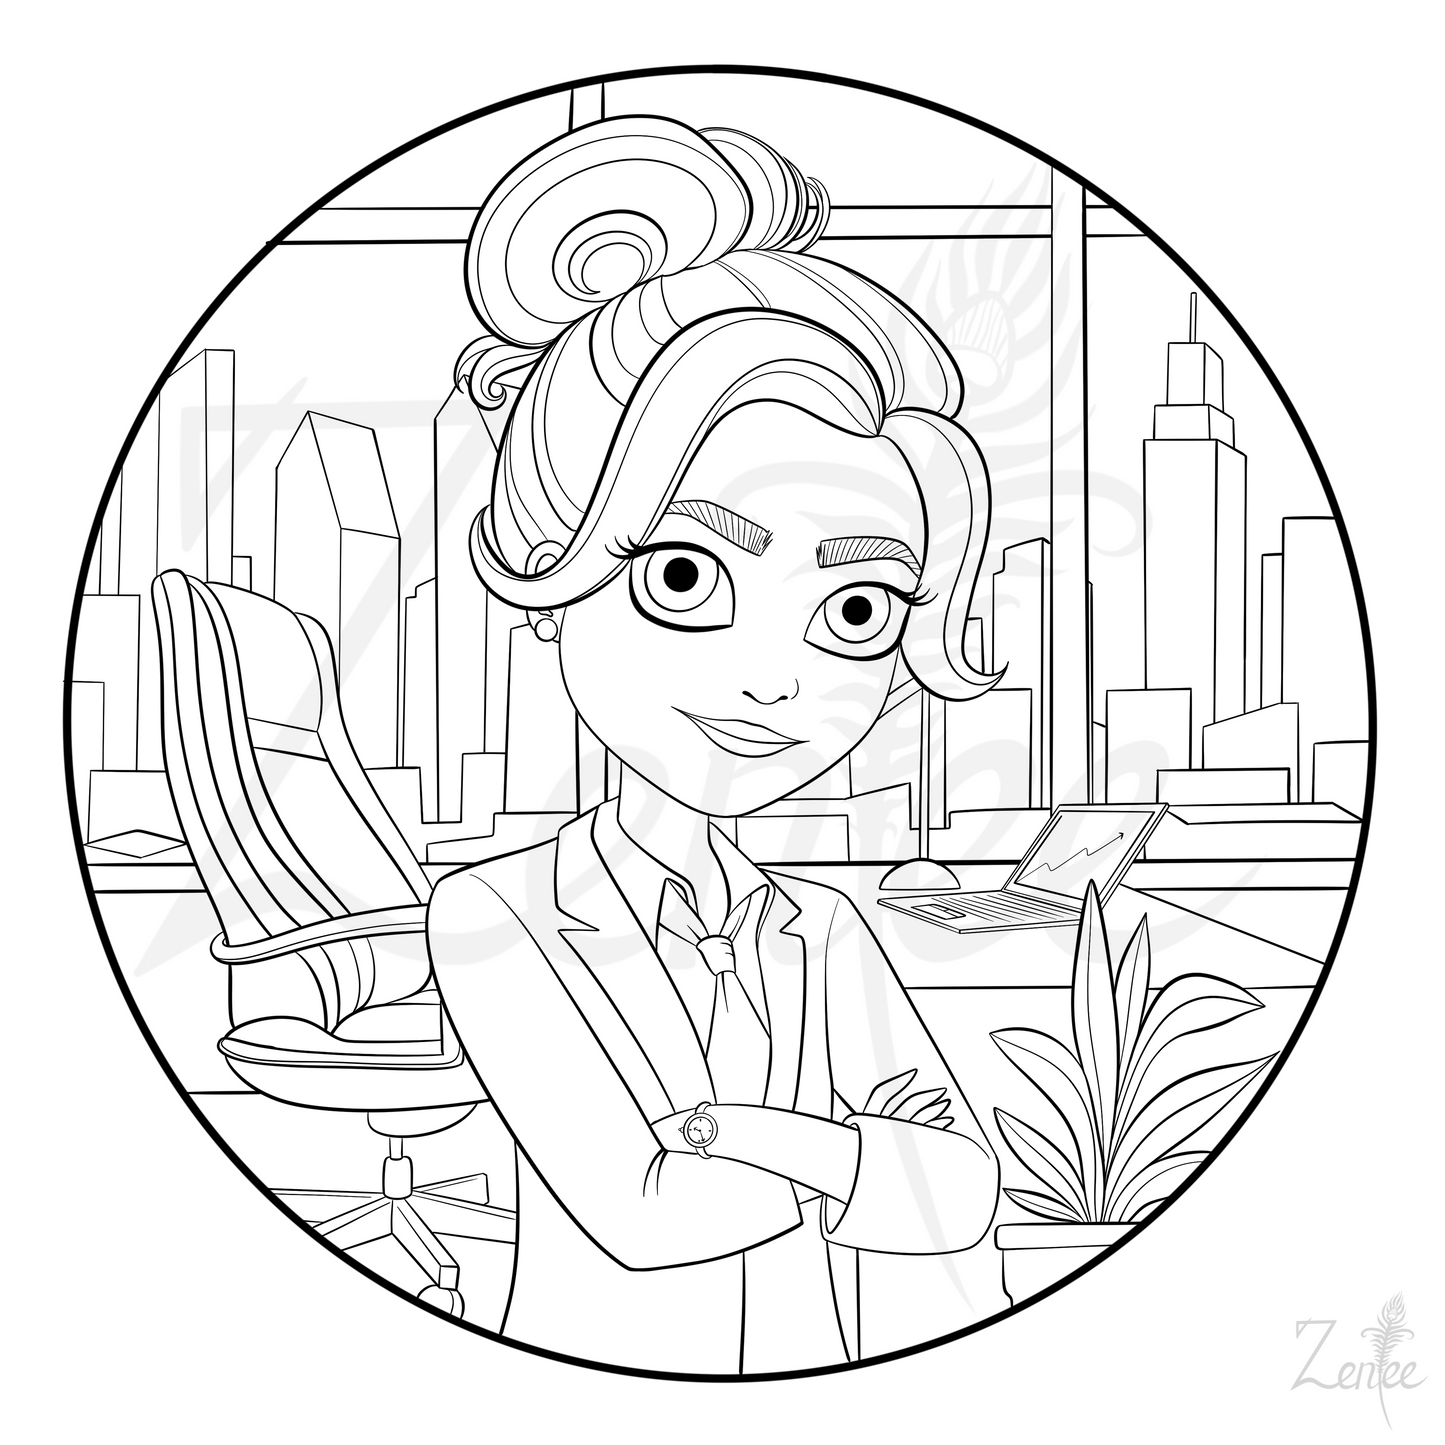 Alphabet Book: Chandni the CEO - Coloring Page